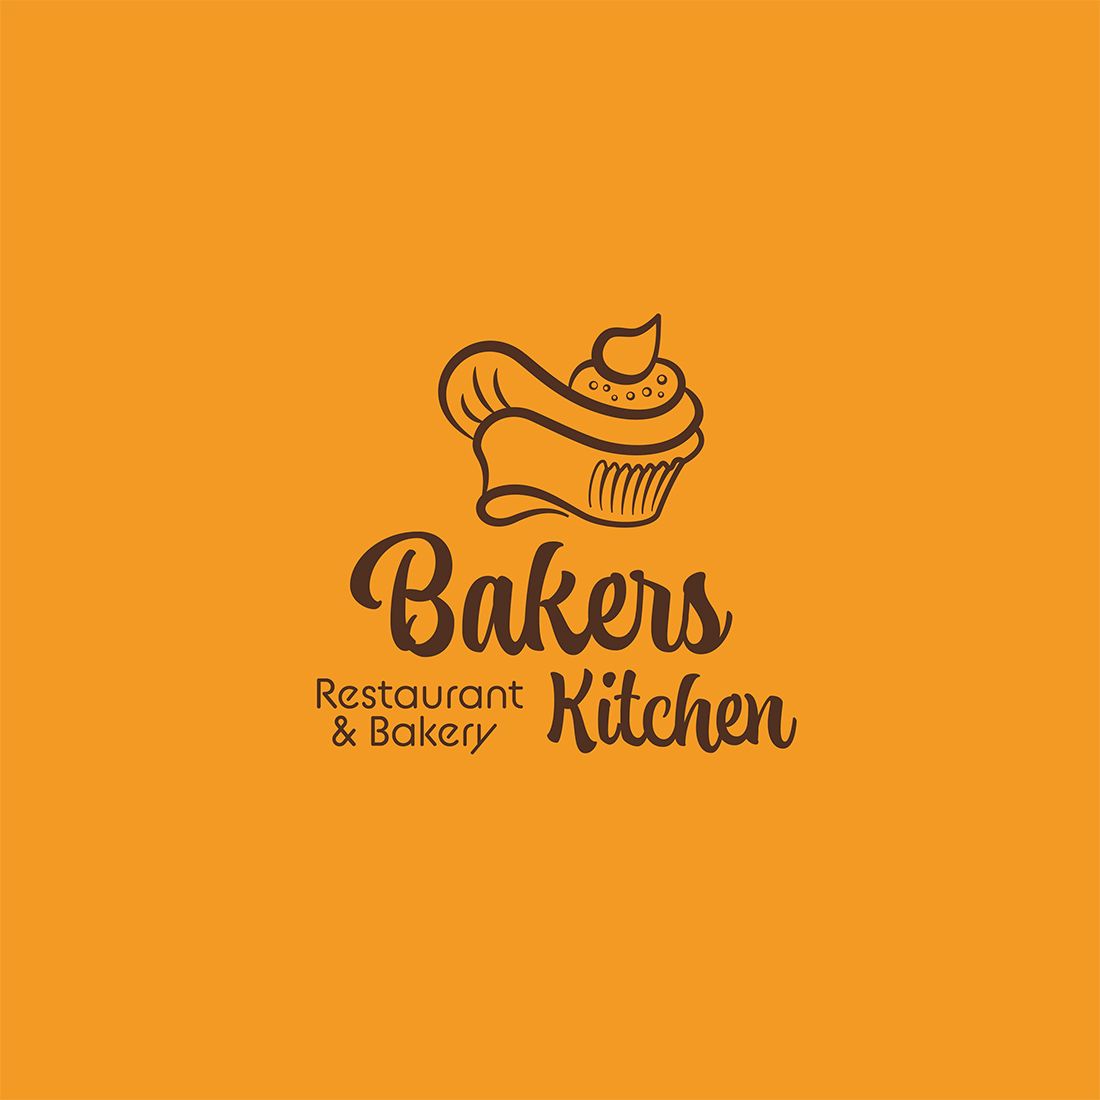 Buy Bakers Kitchen Logo and enjoy.